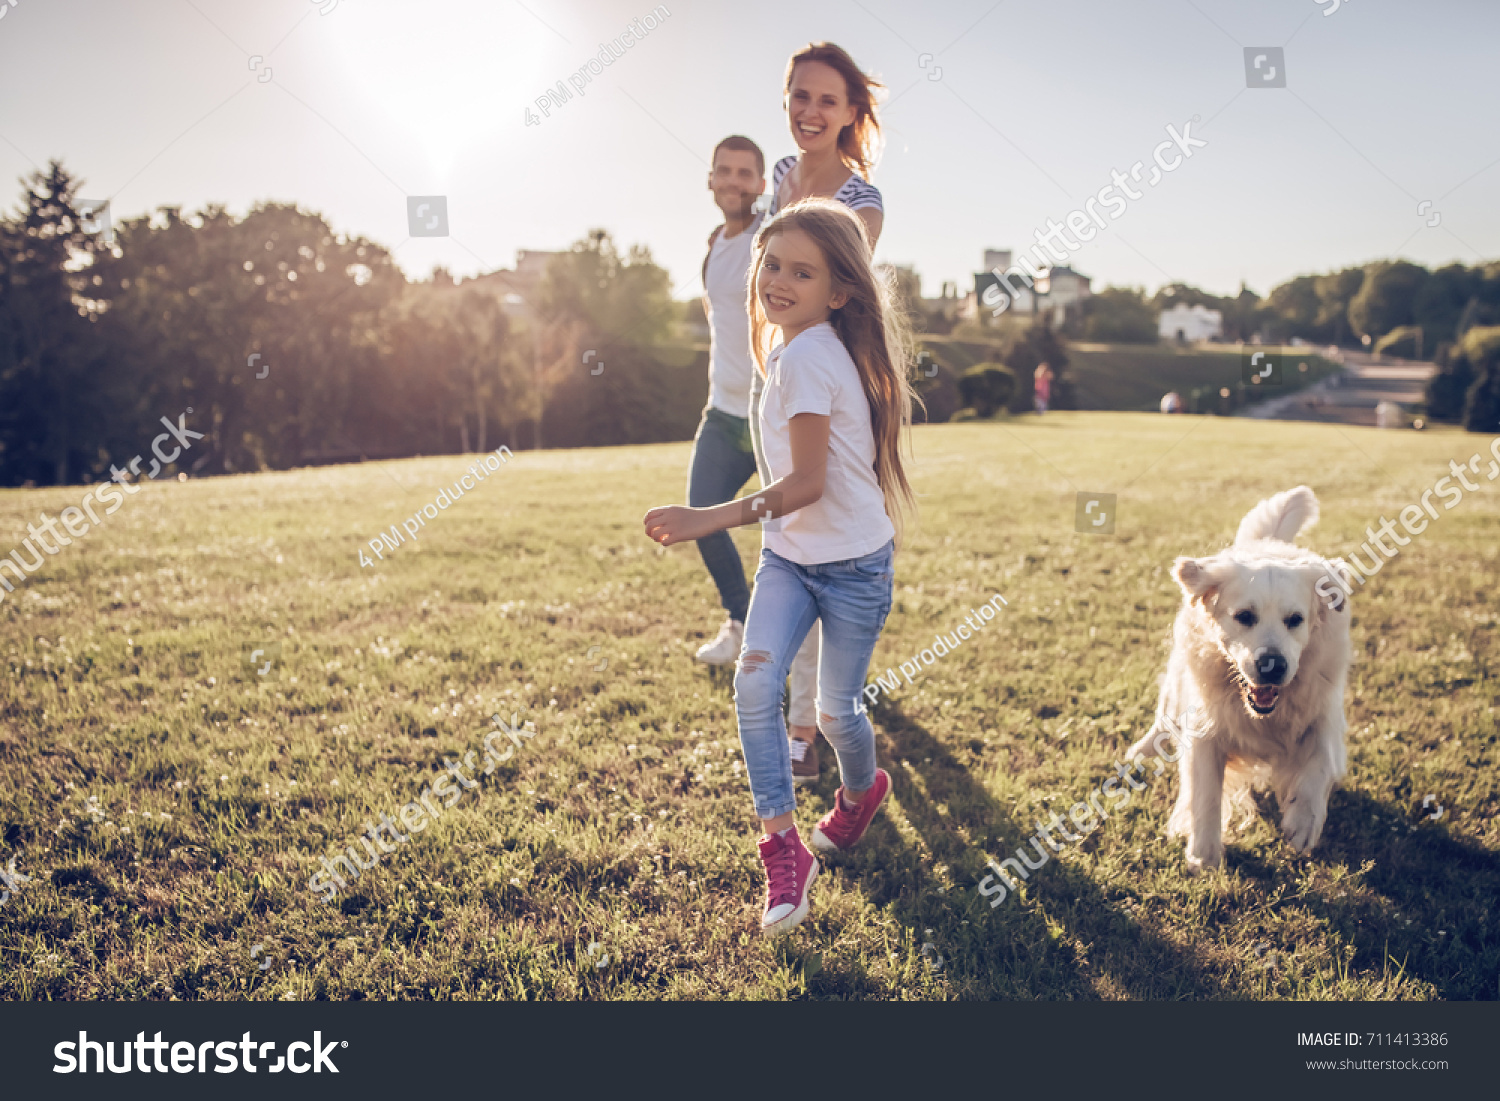 Beautiful happy family is having fun with golden retriever outdoors. Mother, father and daughter are running with dog labrador in park. #711413386